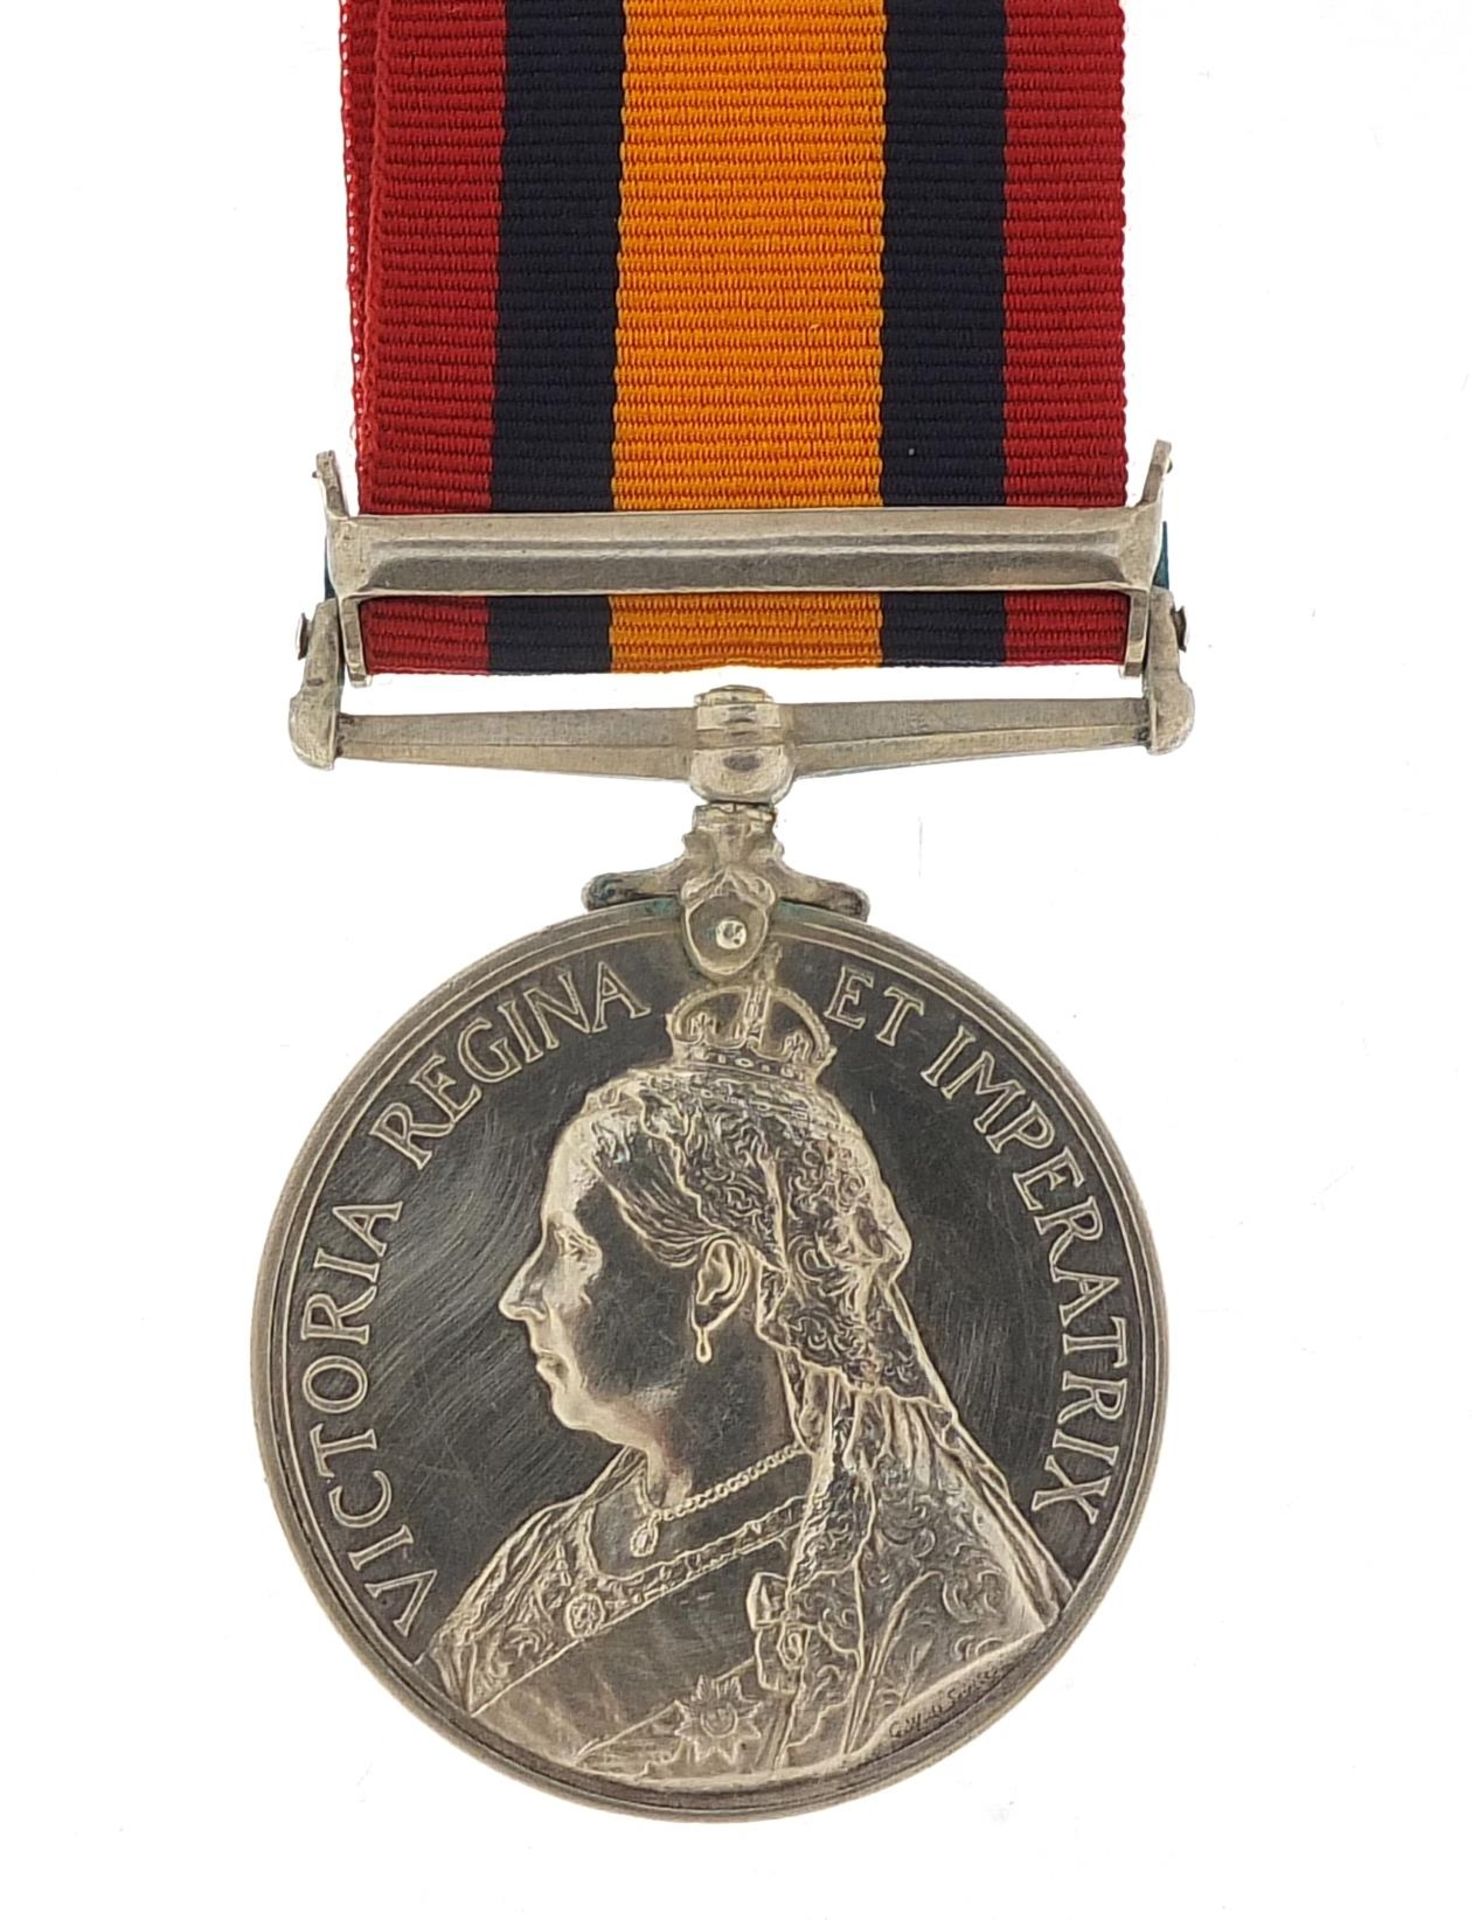 Victorian British military Queen's South Africa medal with Transvaal bar awarded to 2242TPR:J. - Image 2 of 3